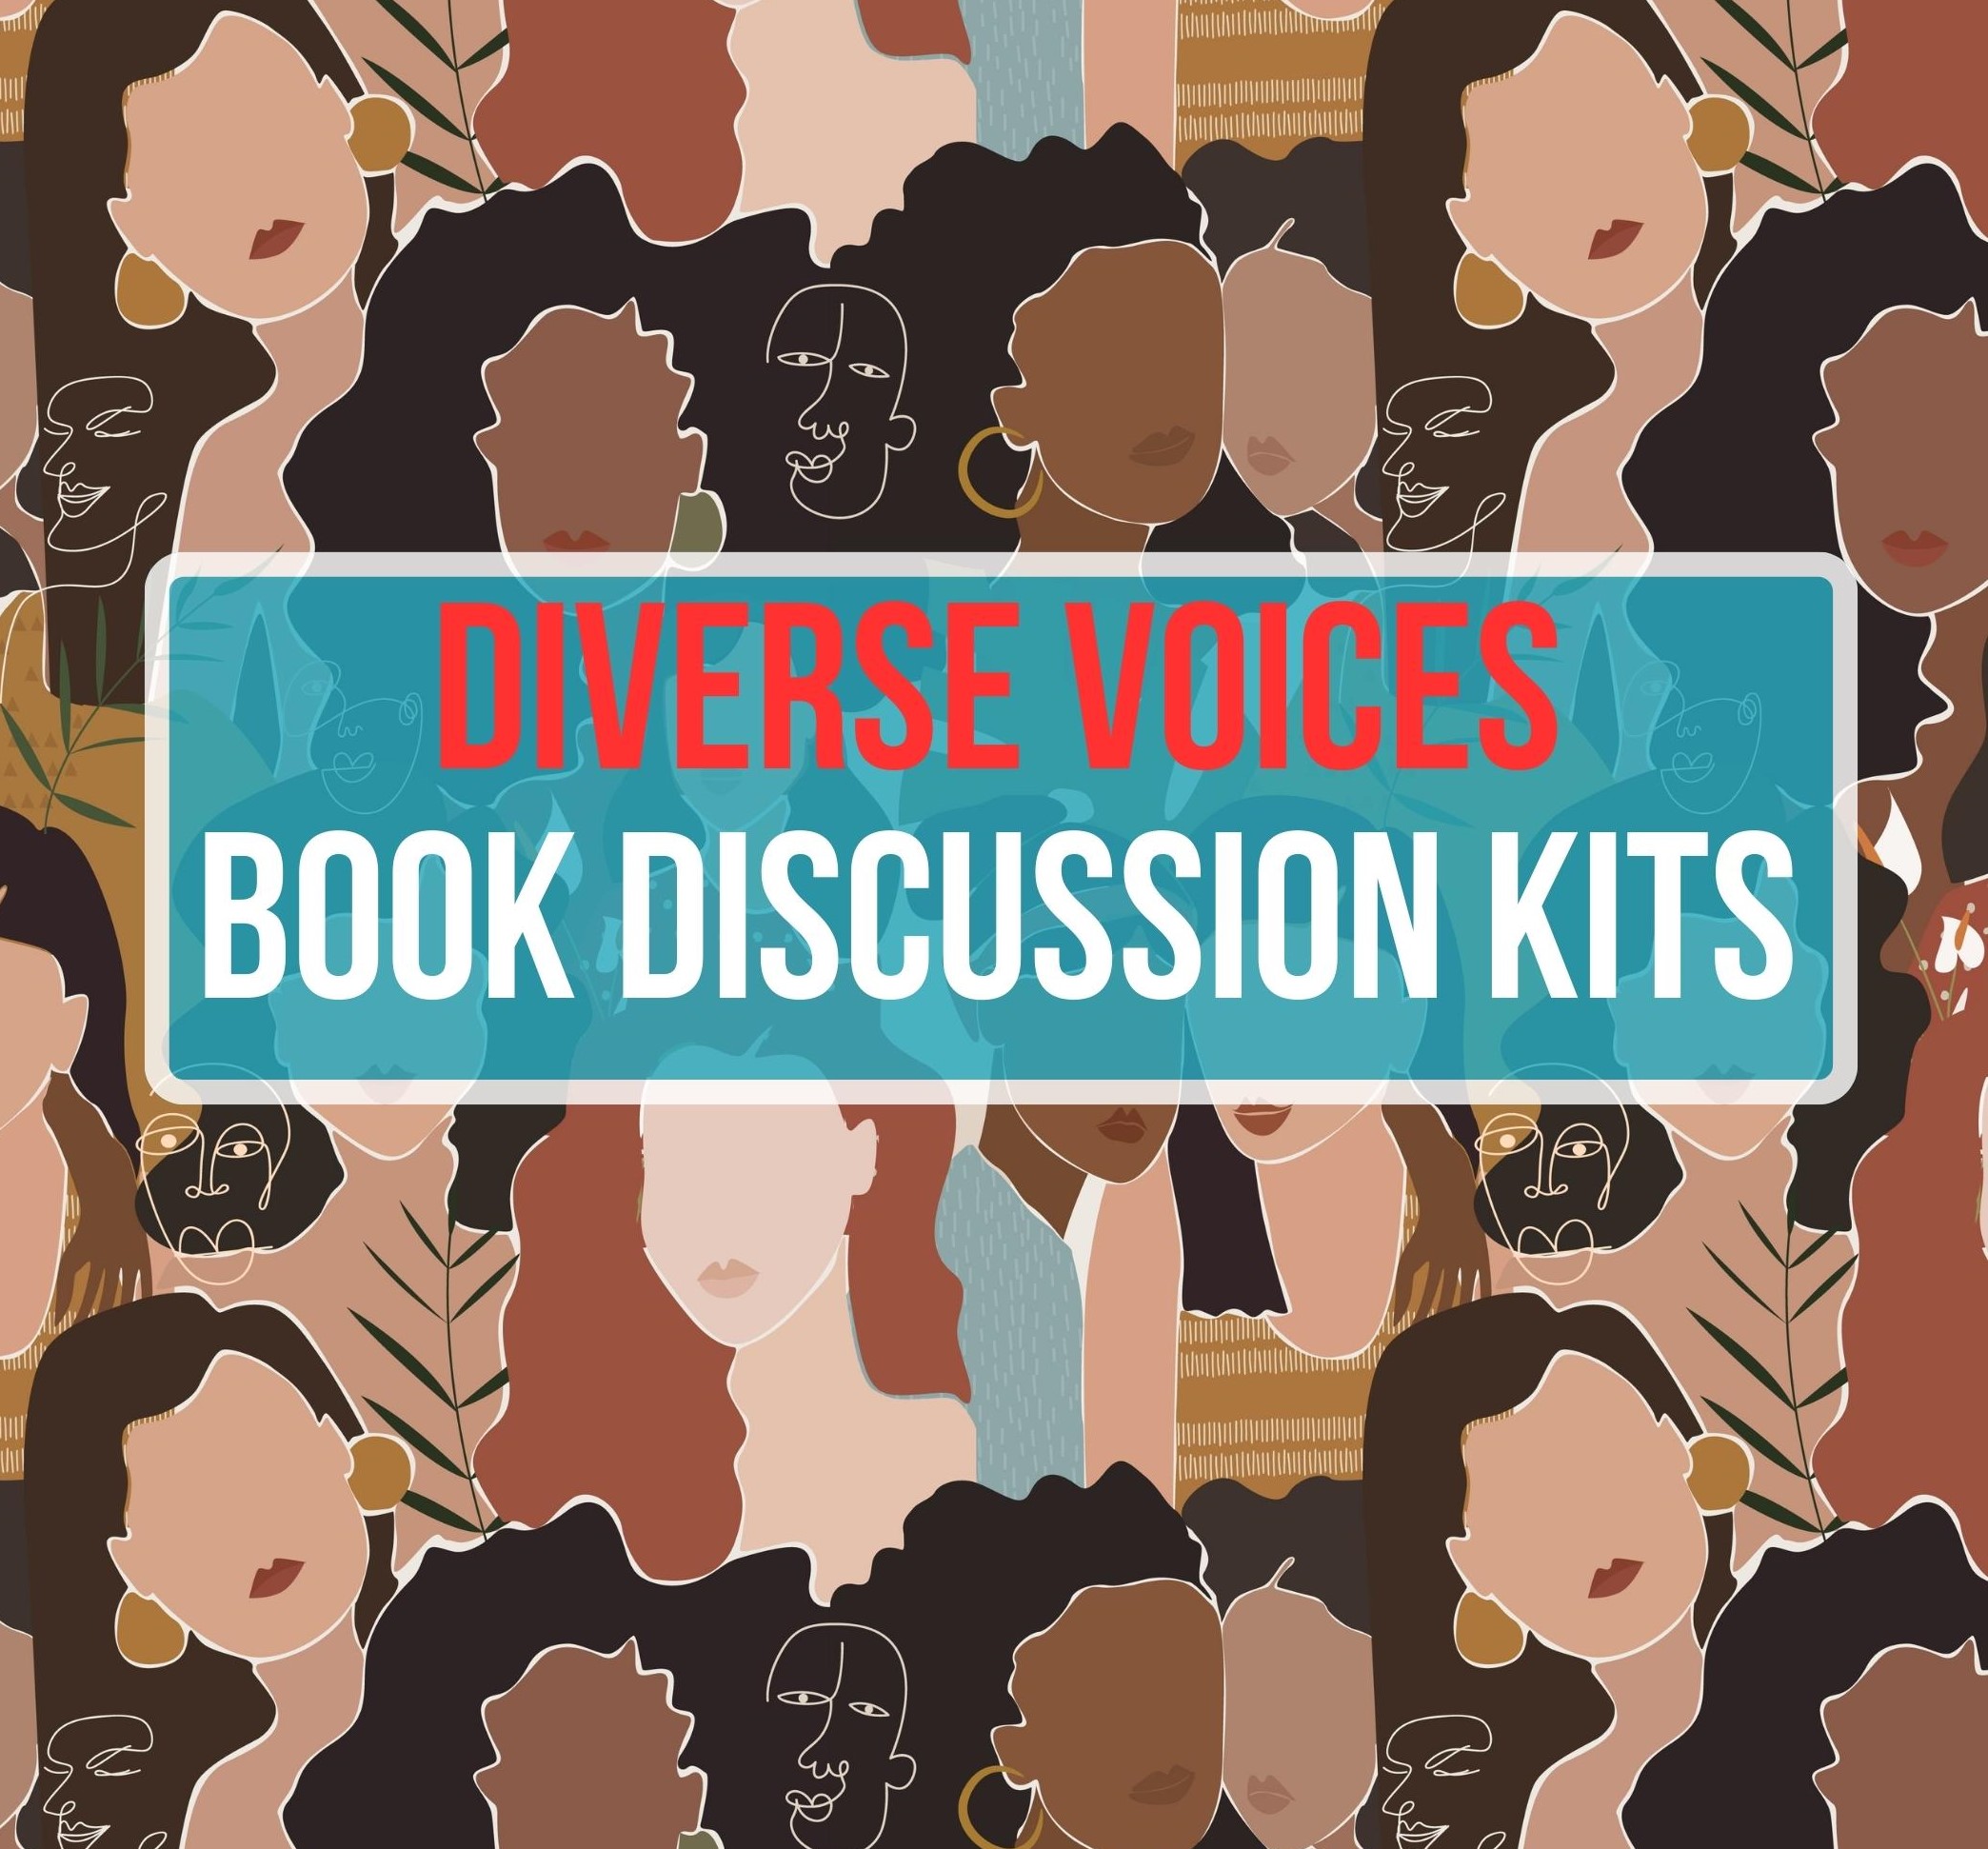 INTRODUCING:  12 “Diverse Voices” Book Discussion Kits